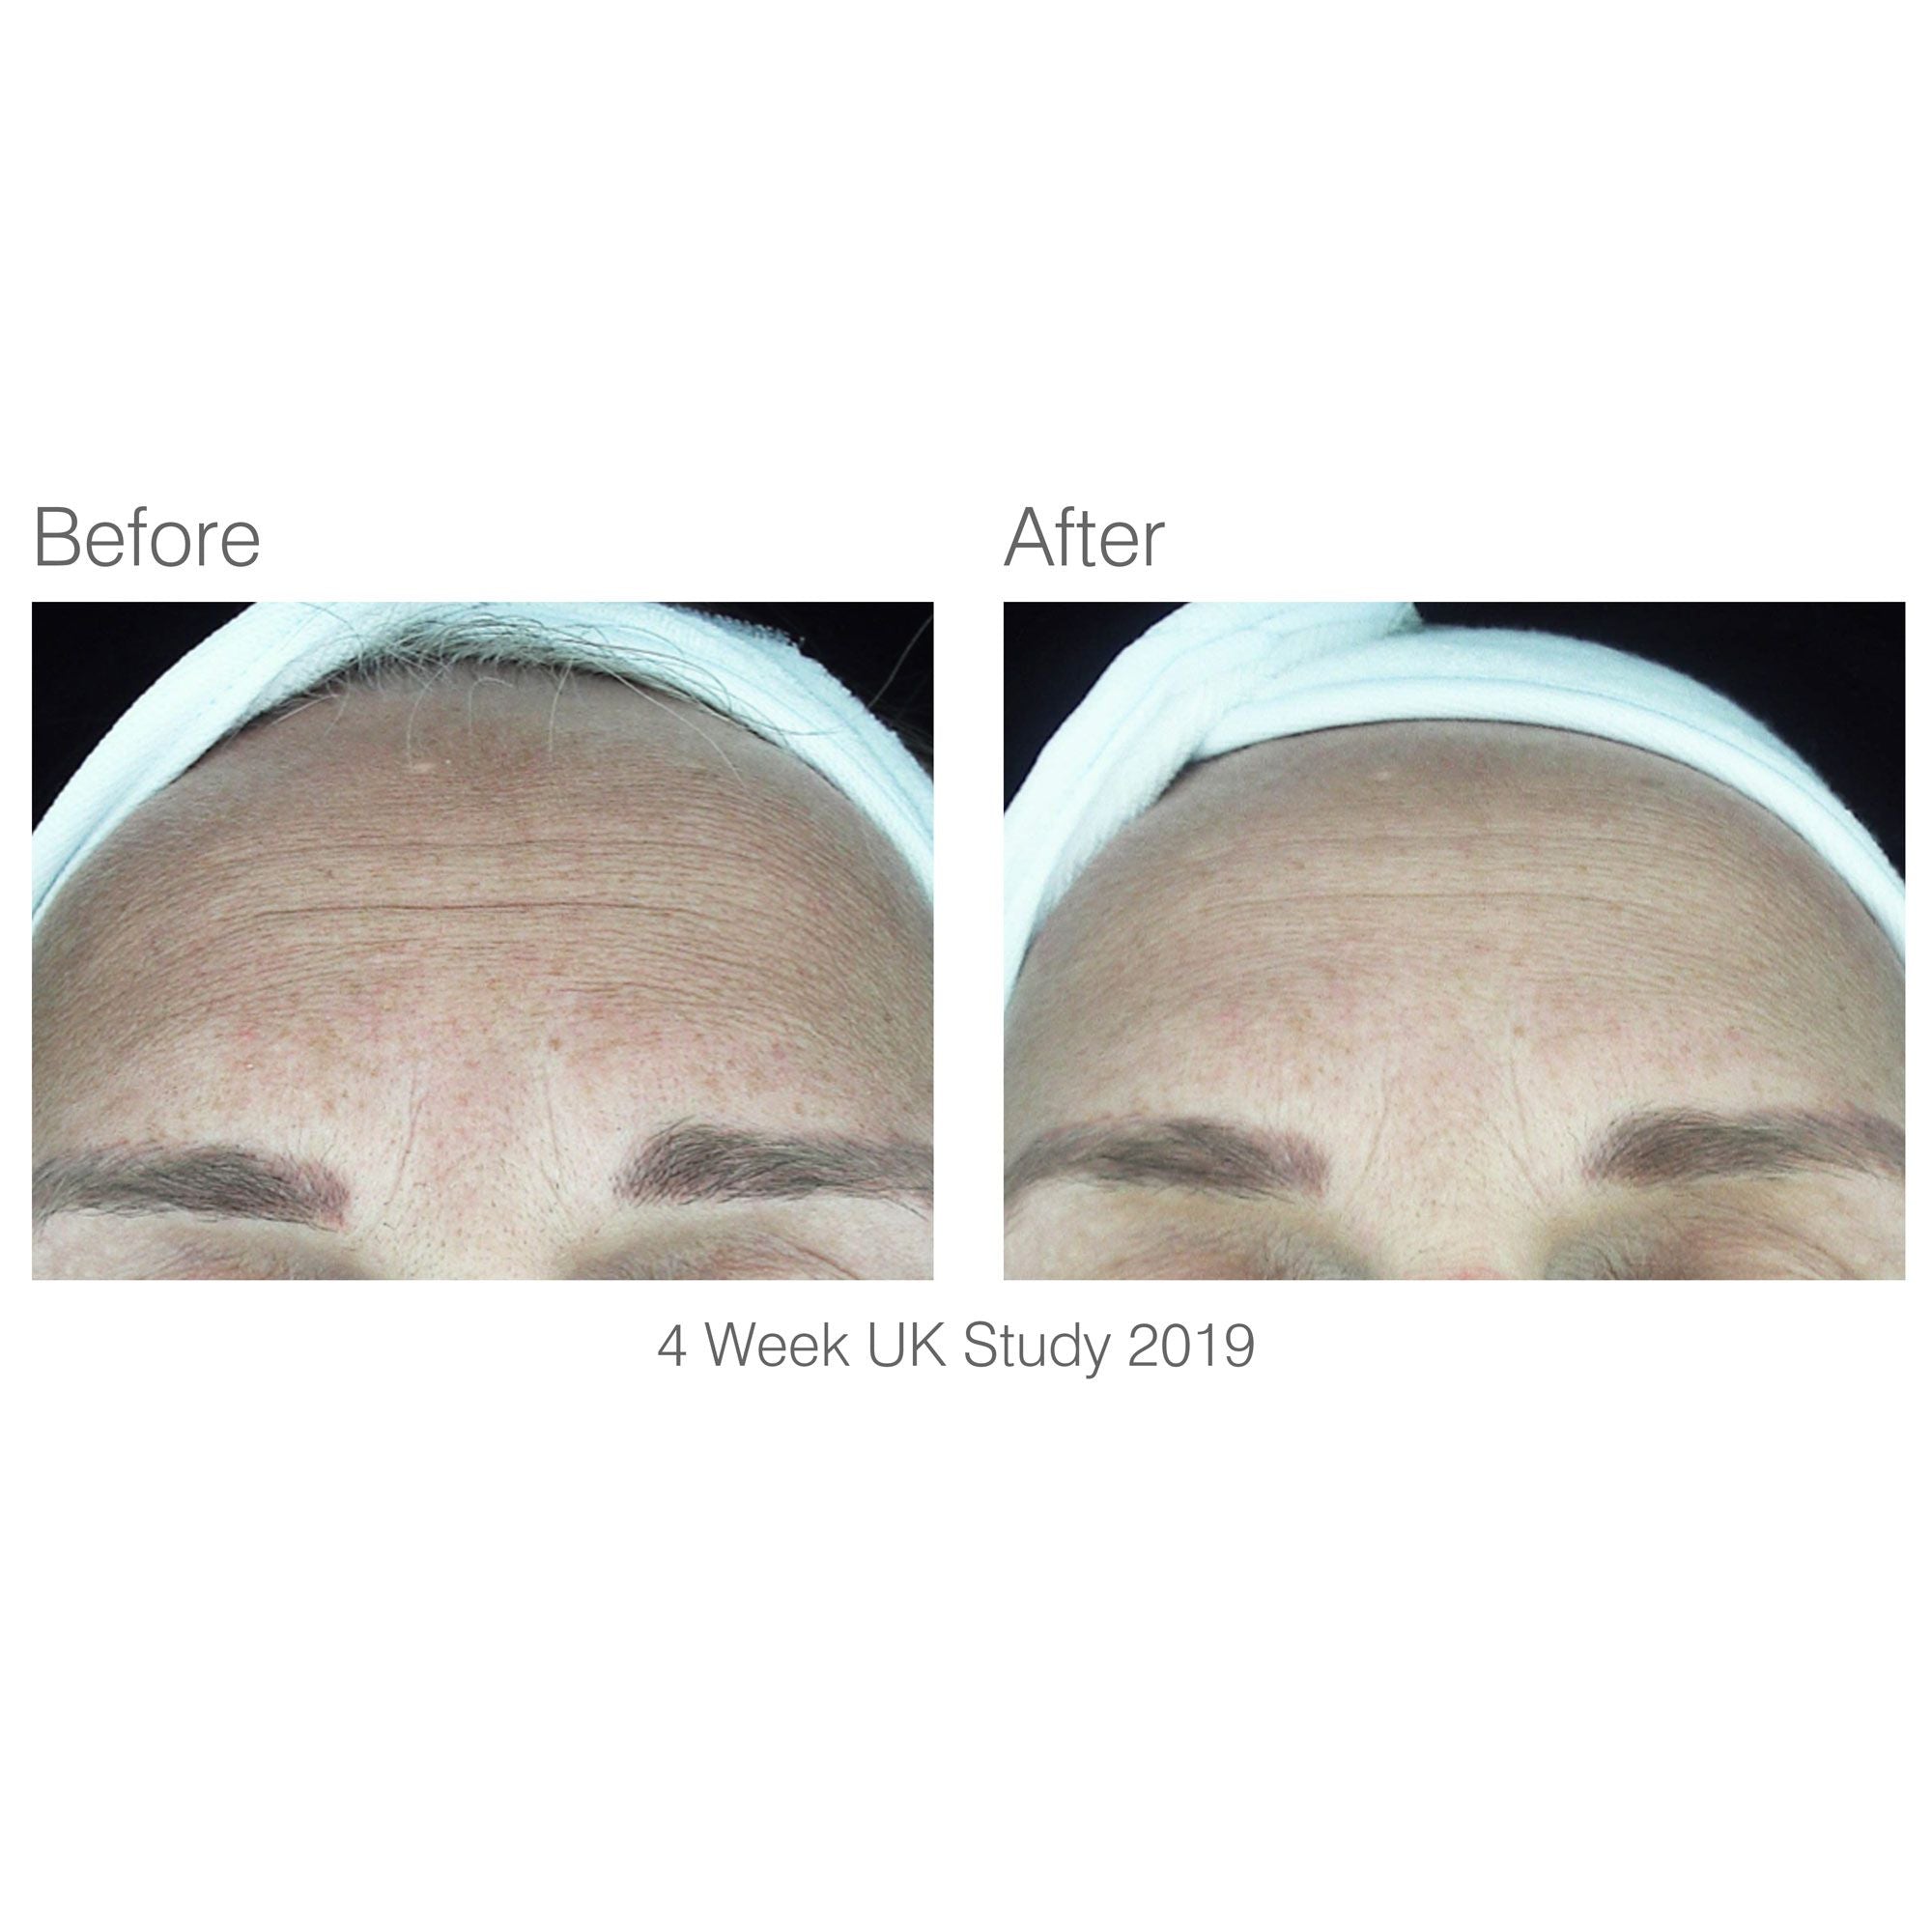 before and after 4 week study of forehead area with visibly reduced wrinkles after using facelite beauty boosting LED face mask